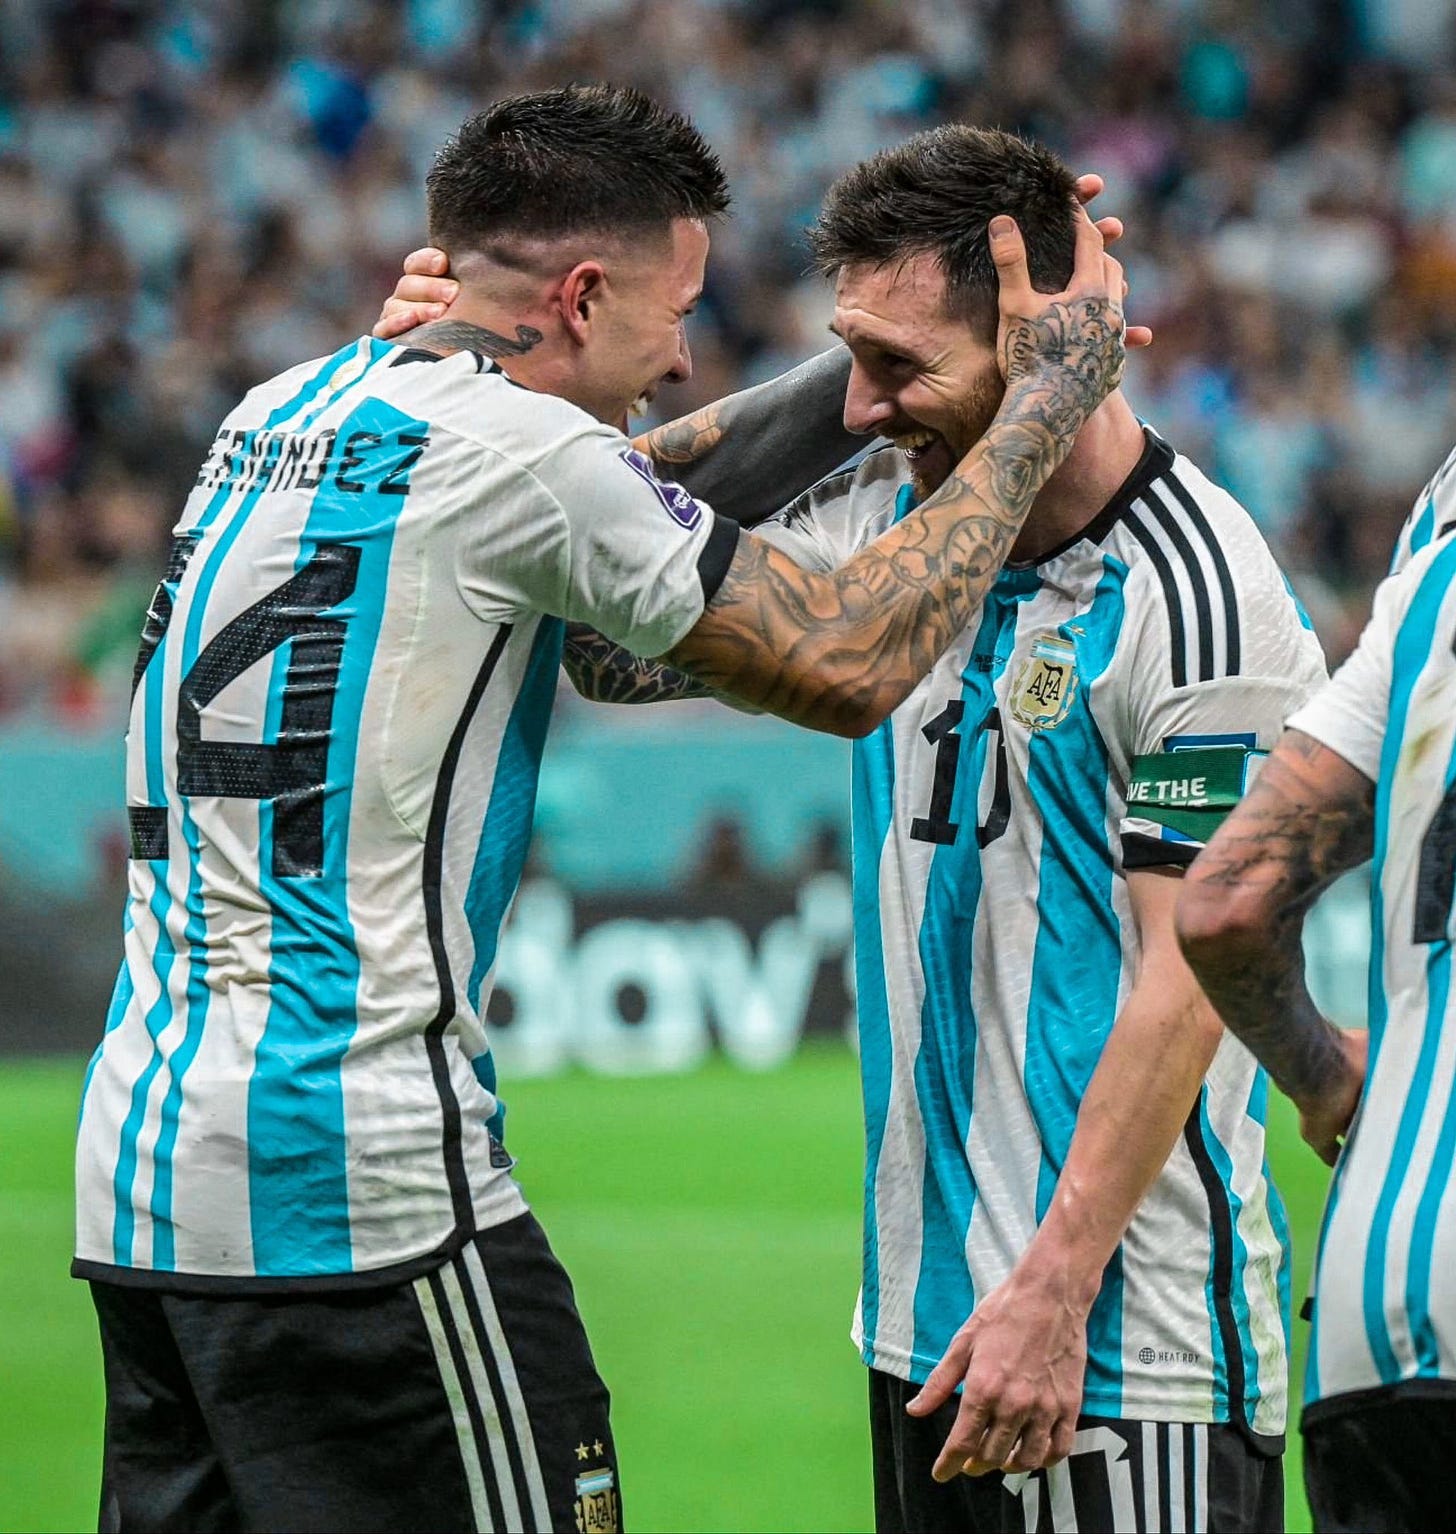 All About Argentina 🛎🇦🇷 on Twitter: "Leo Messi: “Enzo Fernández deserves  everything he is going through.” https://t.co/i0VBlLXJxX" / Twitter